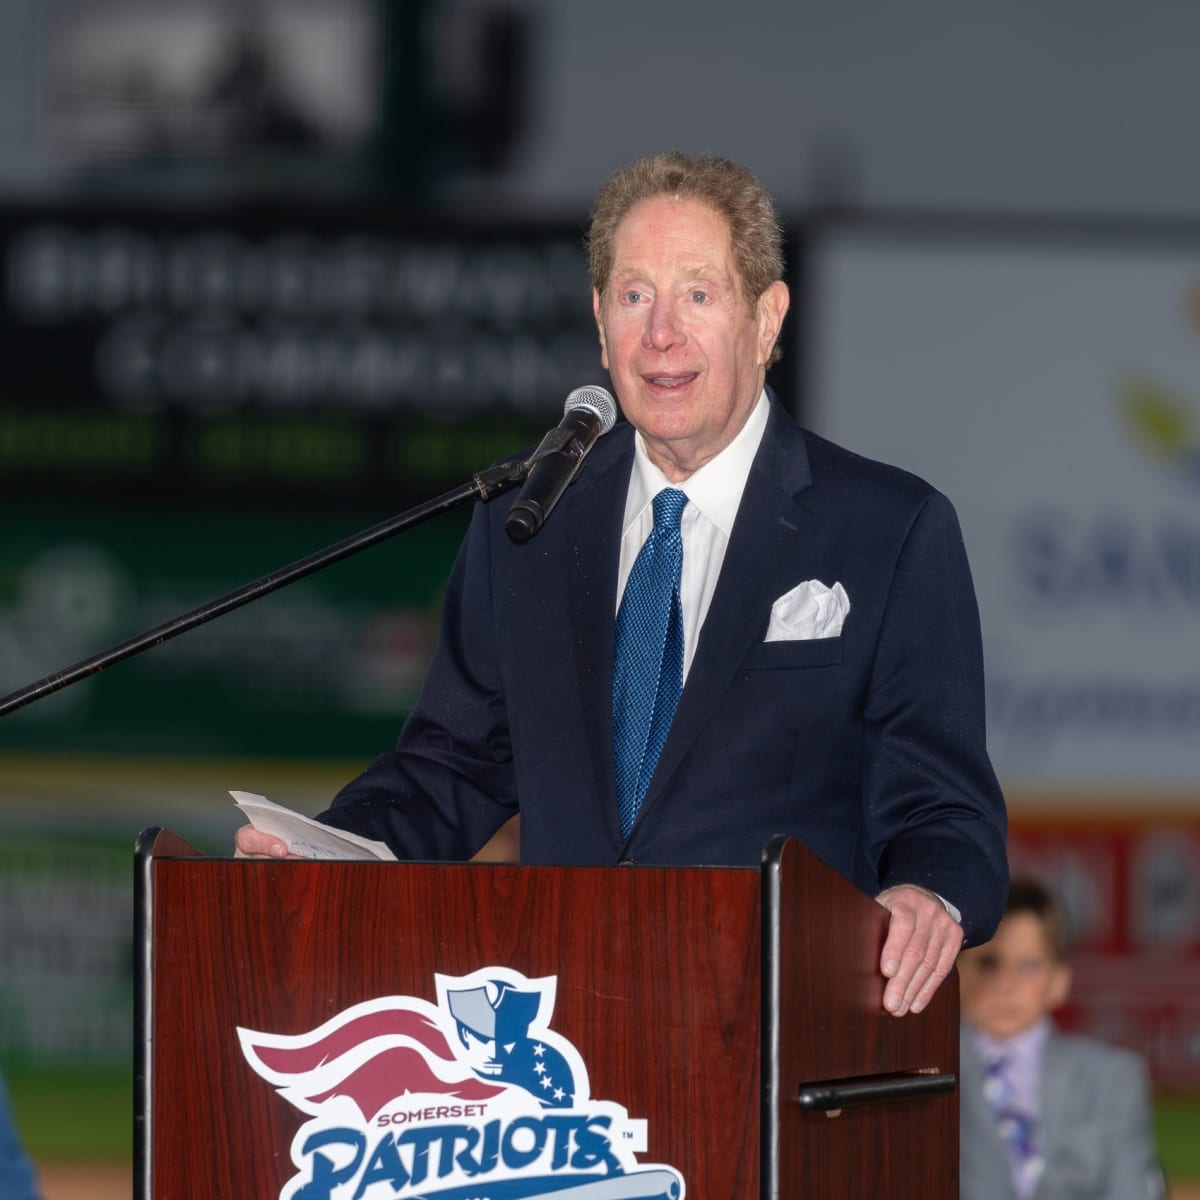 New York Yankees Broadcaster John Sterling to Miss Several